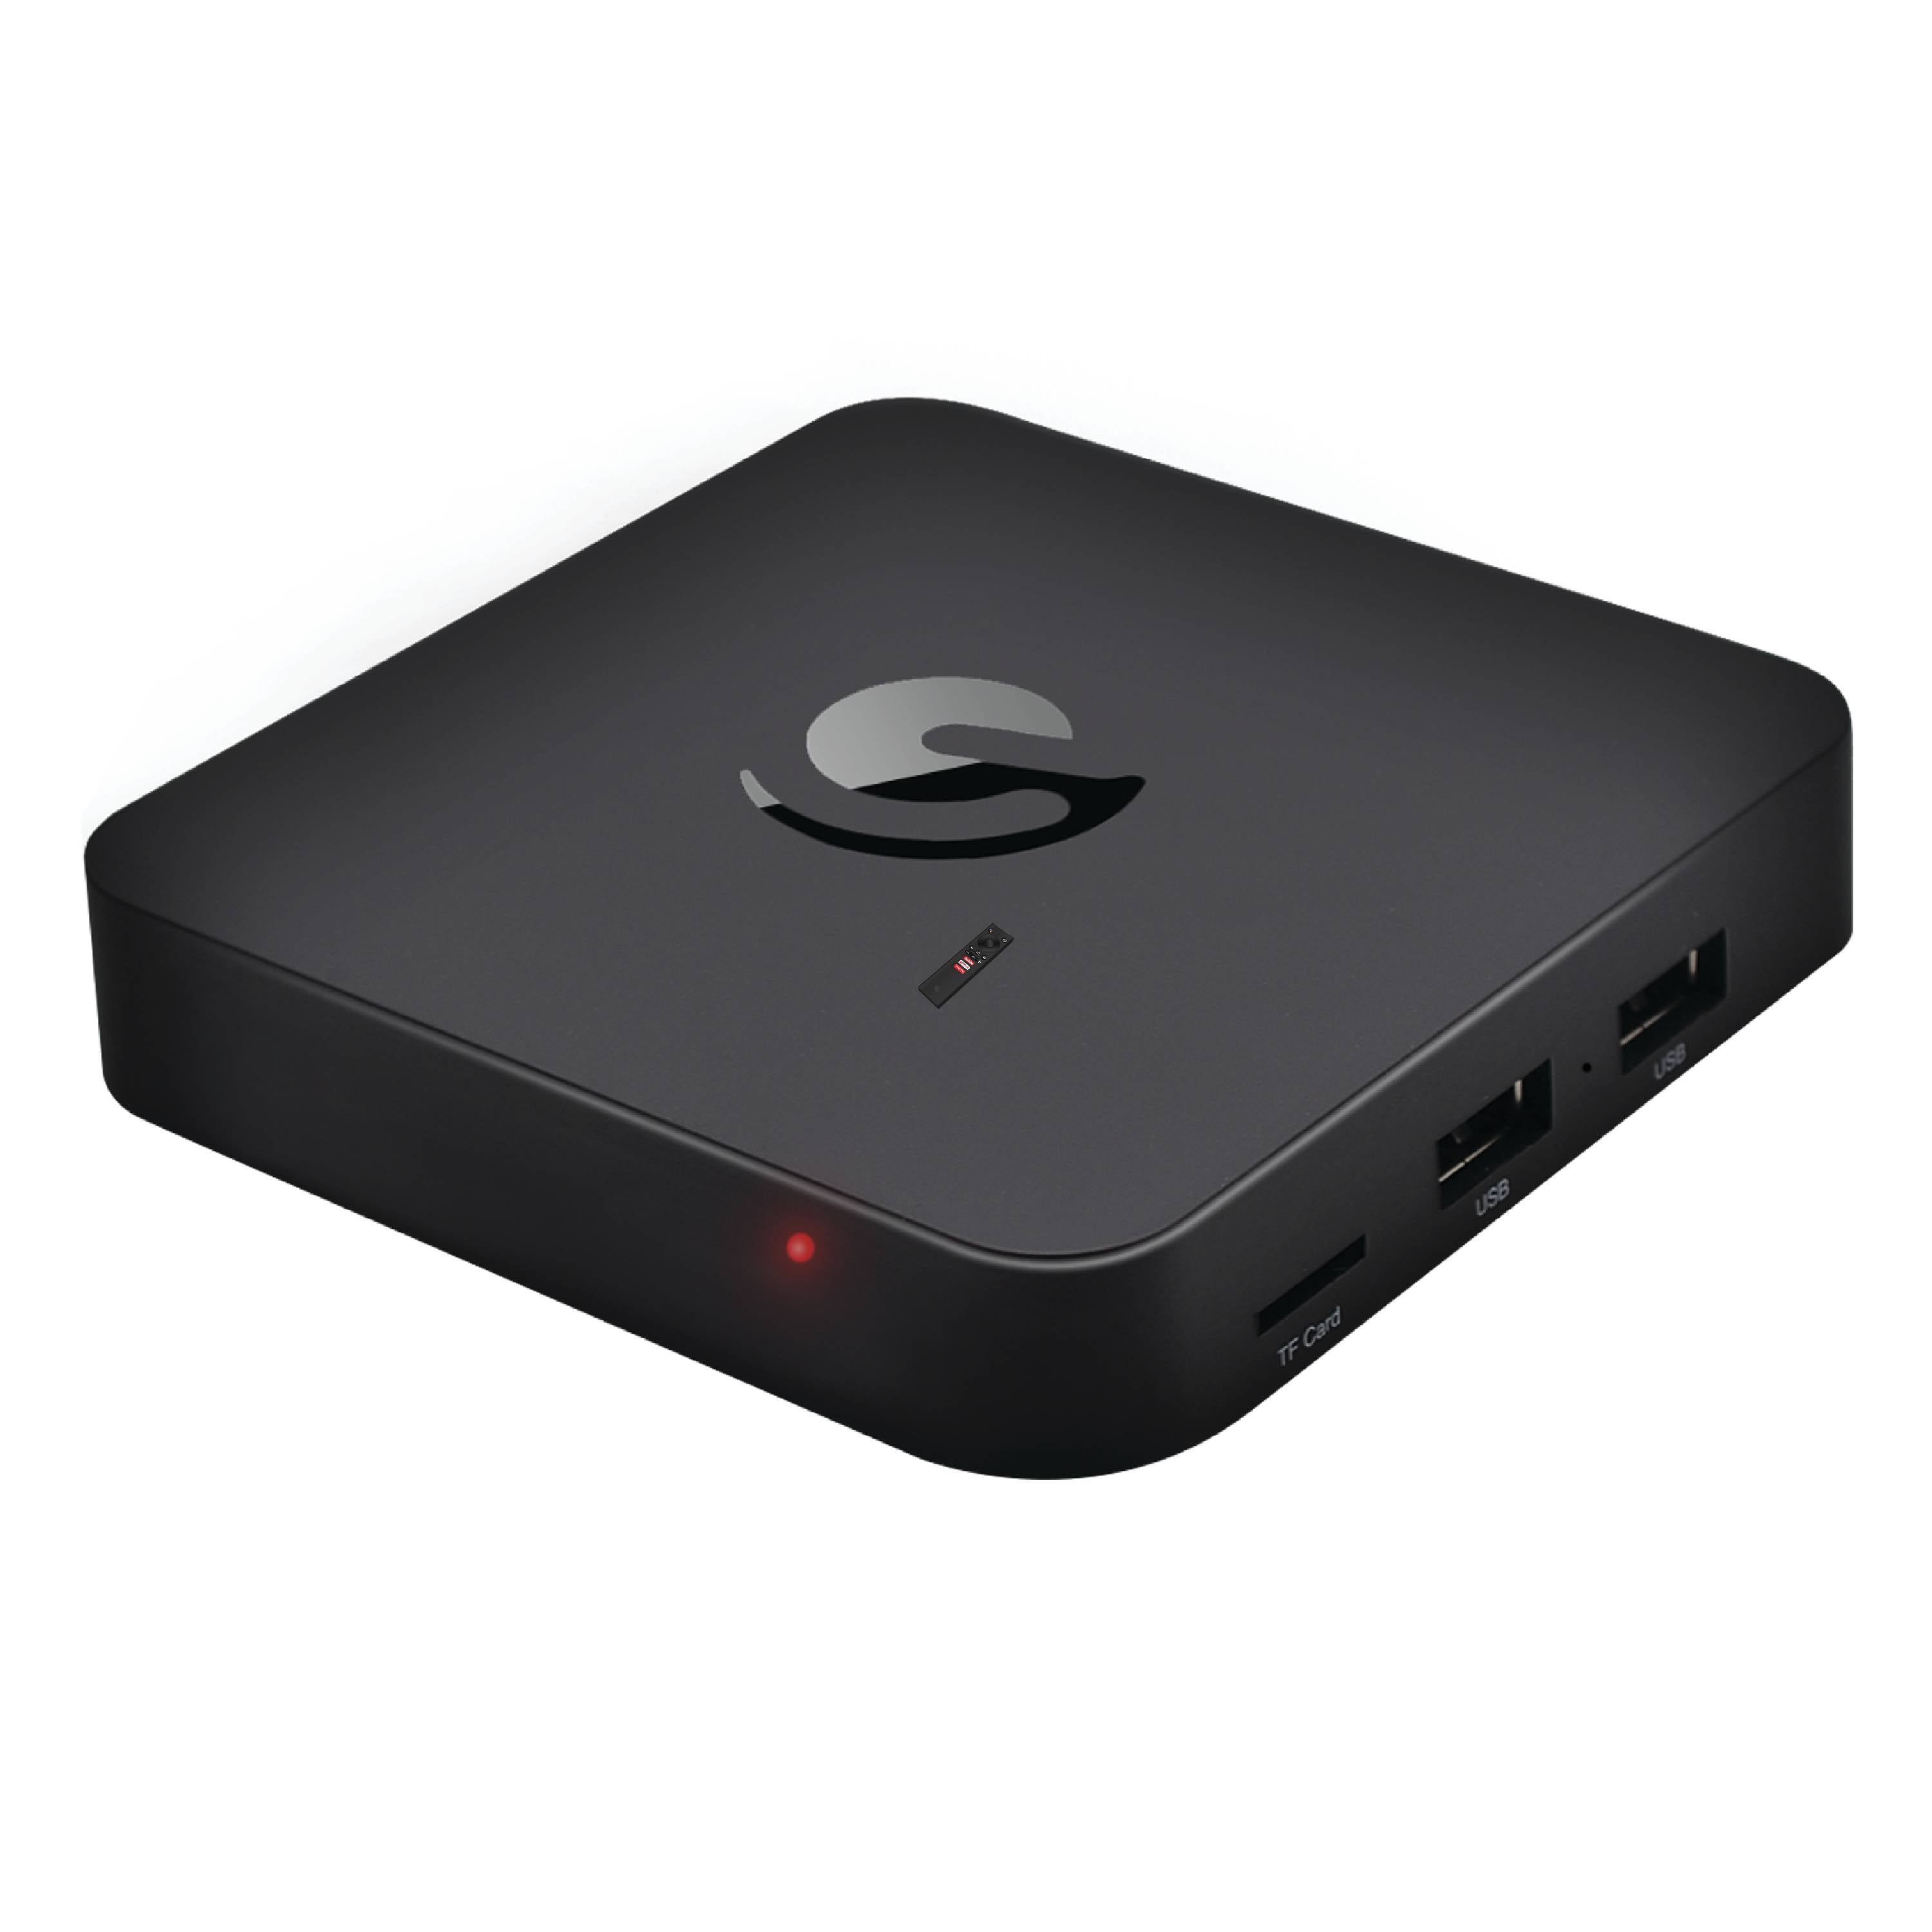 Ematic Jetstream AGT419 Android TV Box Review